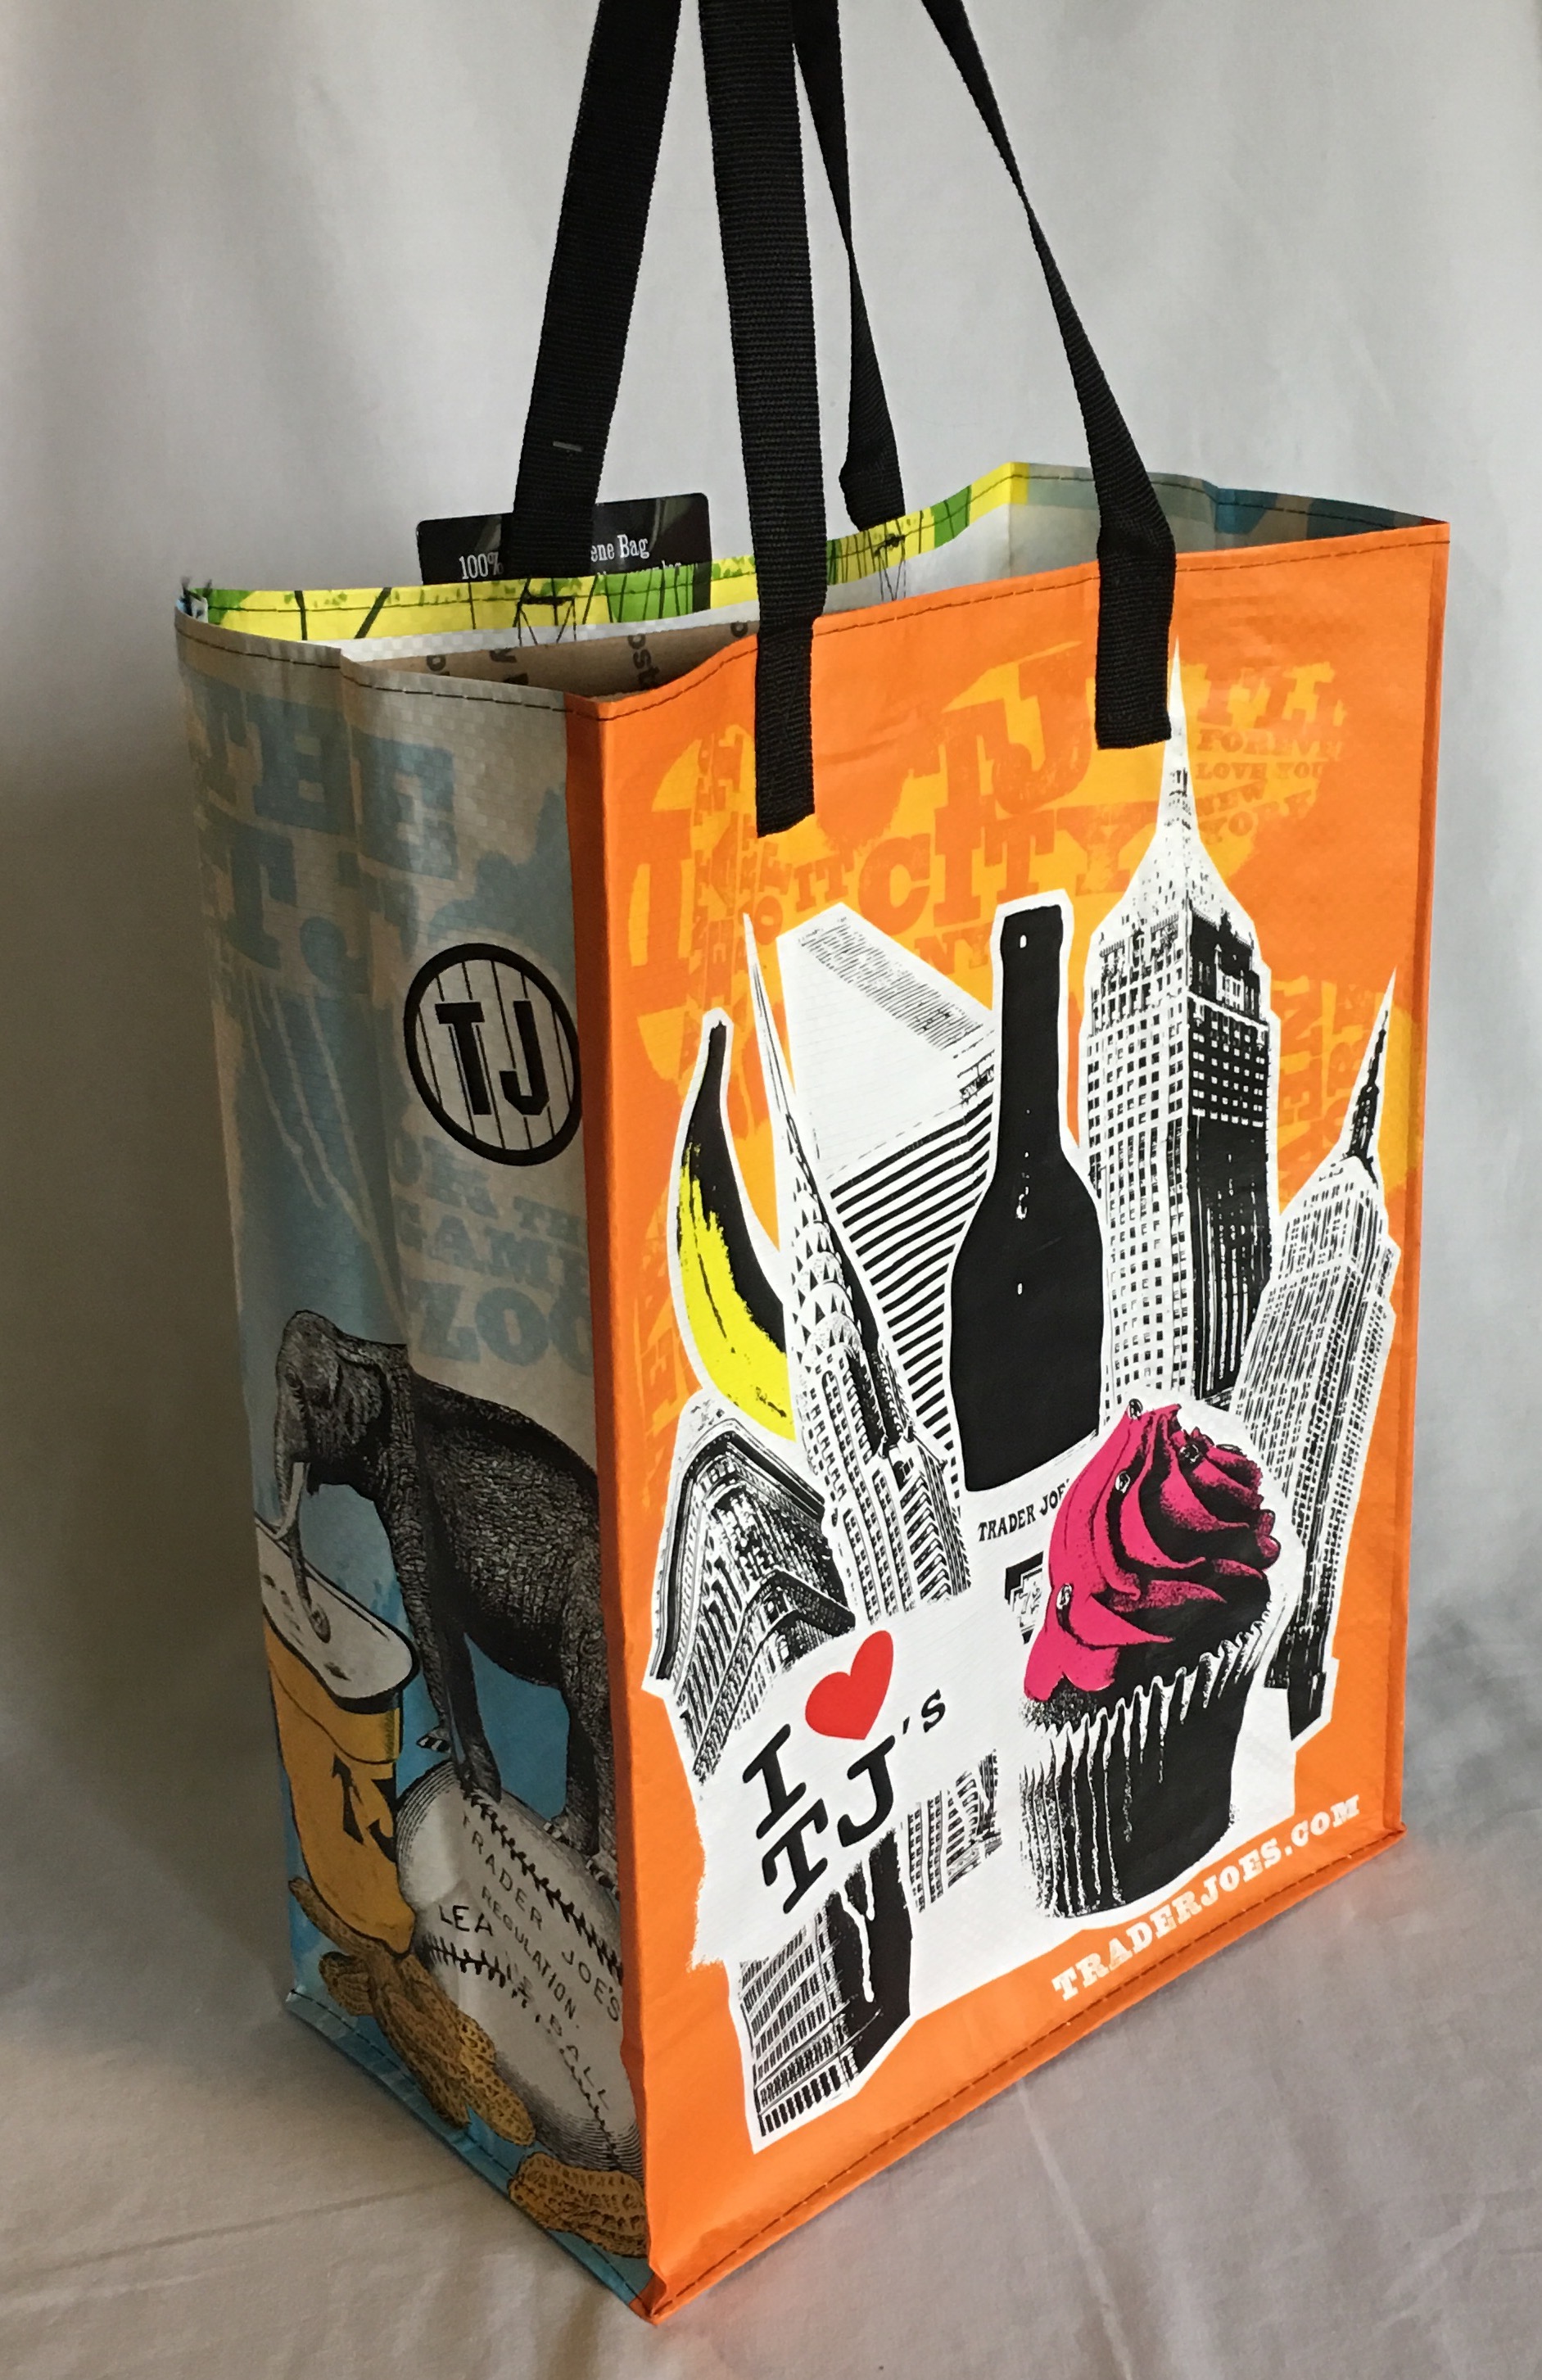 Trader Joe’s Reusable Grocery Tote Bag from New York – Greetings from the Past